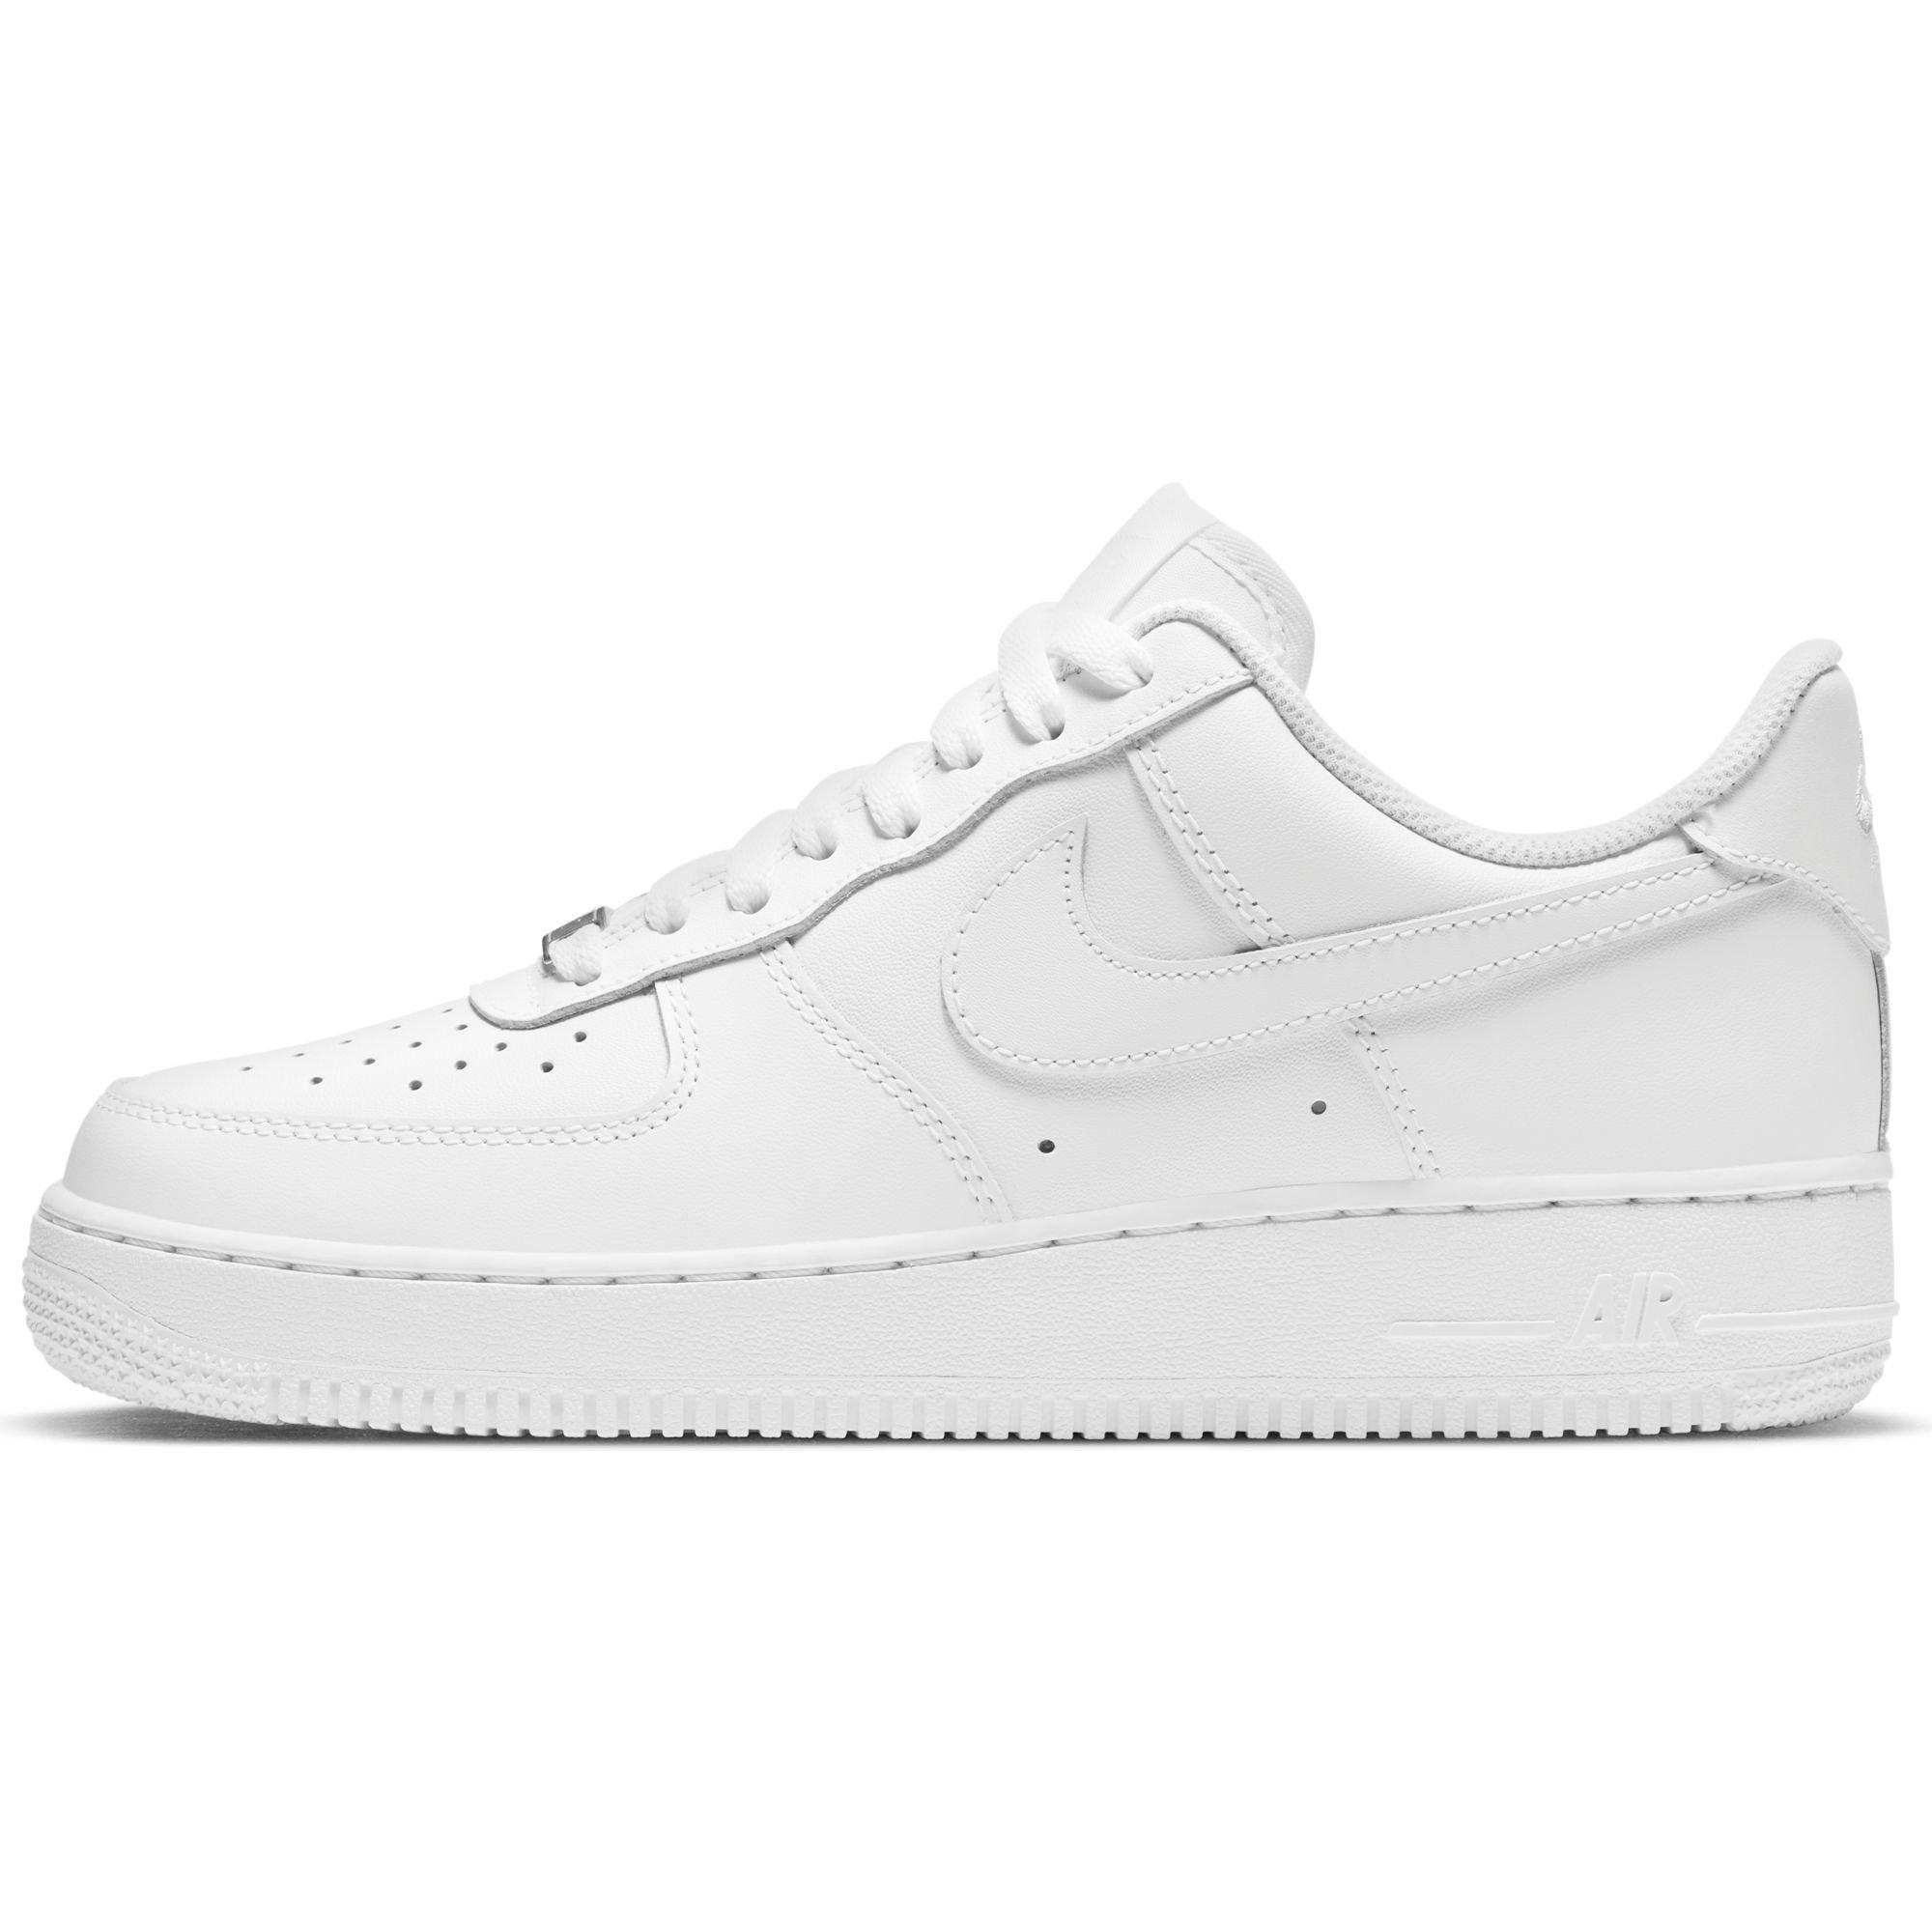 Nike Womens Air Force 1 '07 in White - Size 8.5